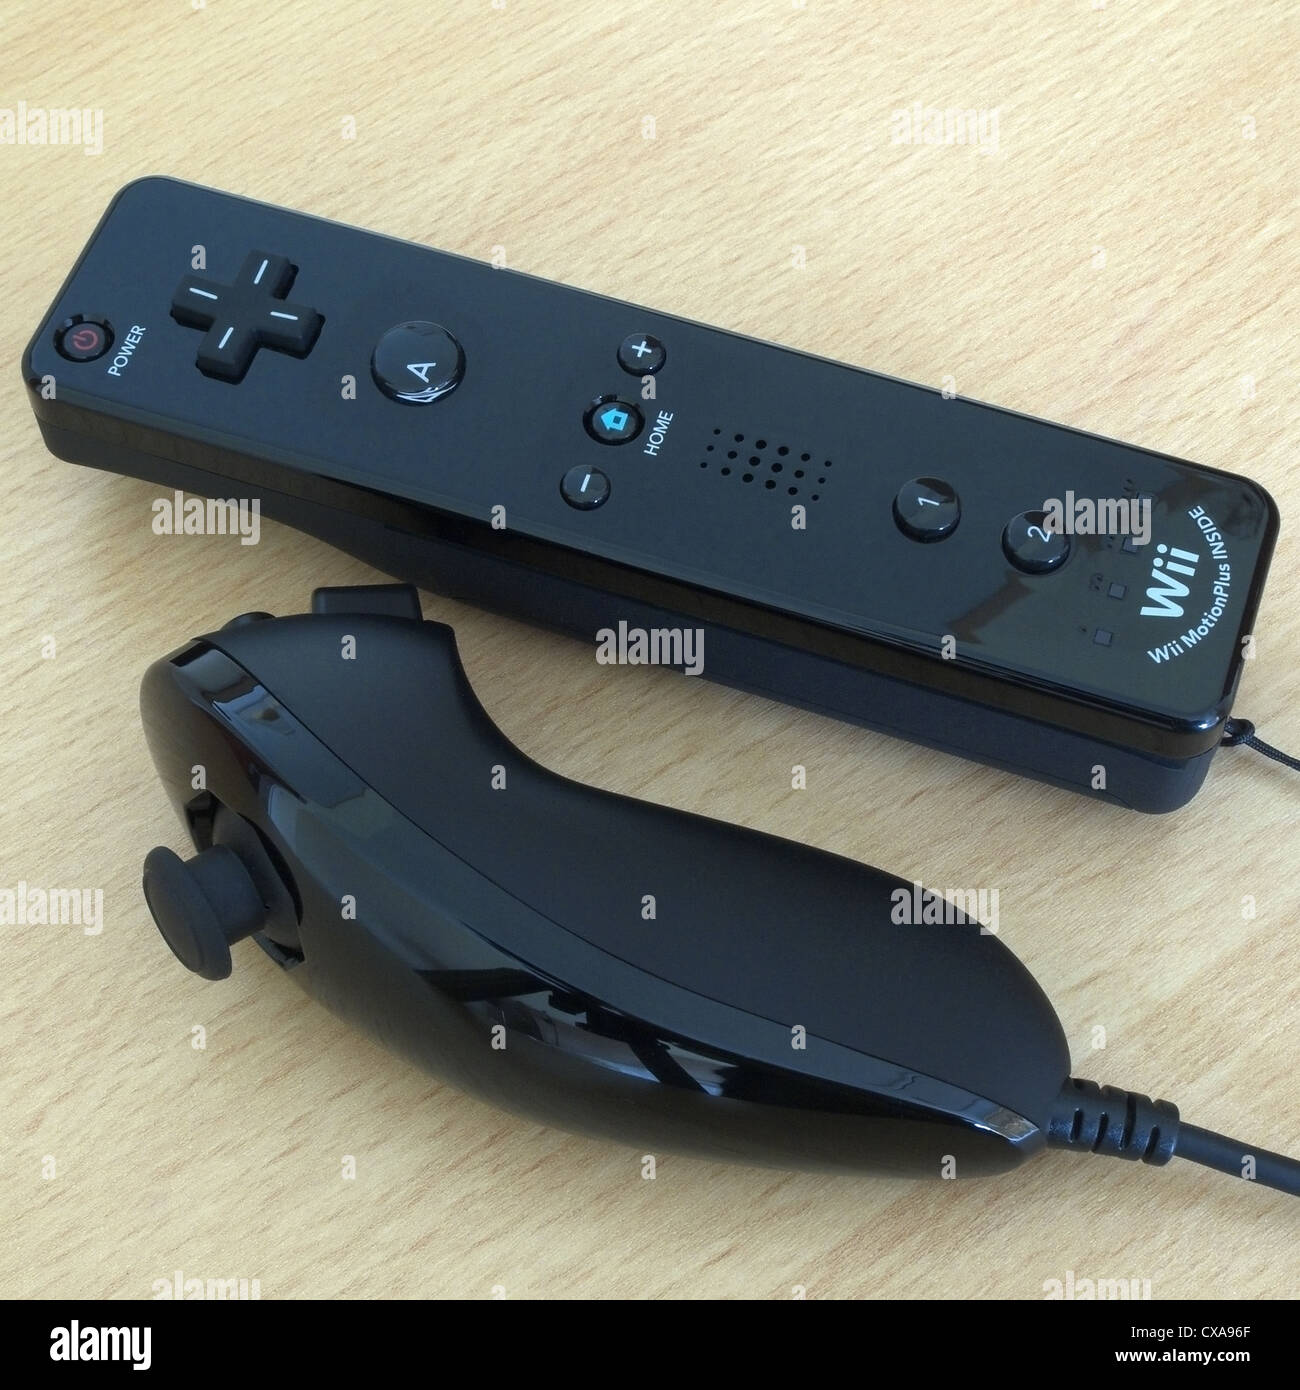 Nintendo Wii Black Remote Controller and Nunchuck on a Wooden Background  Stock Photo - Alamy